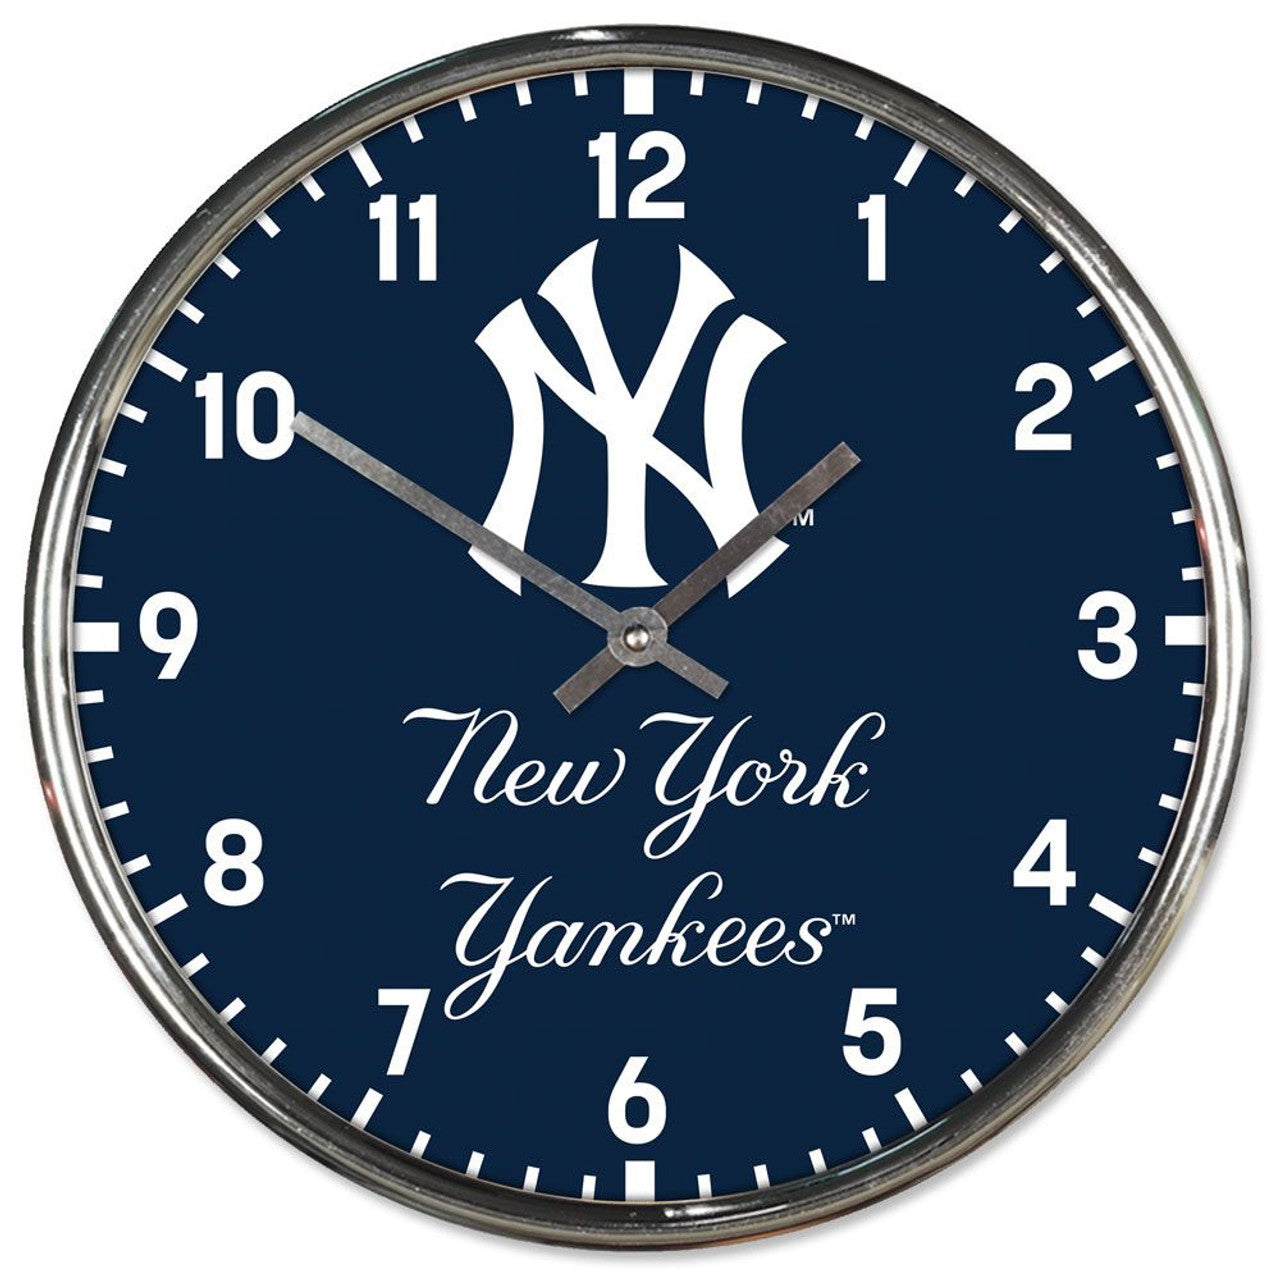 New York Yankees 12" Round Chrome Wall Clock by Wincraft